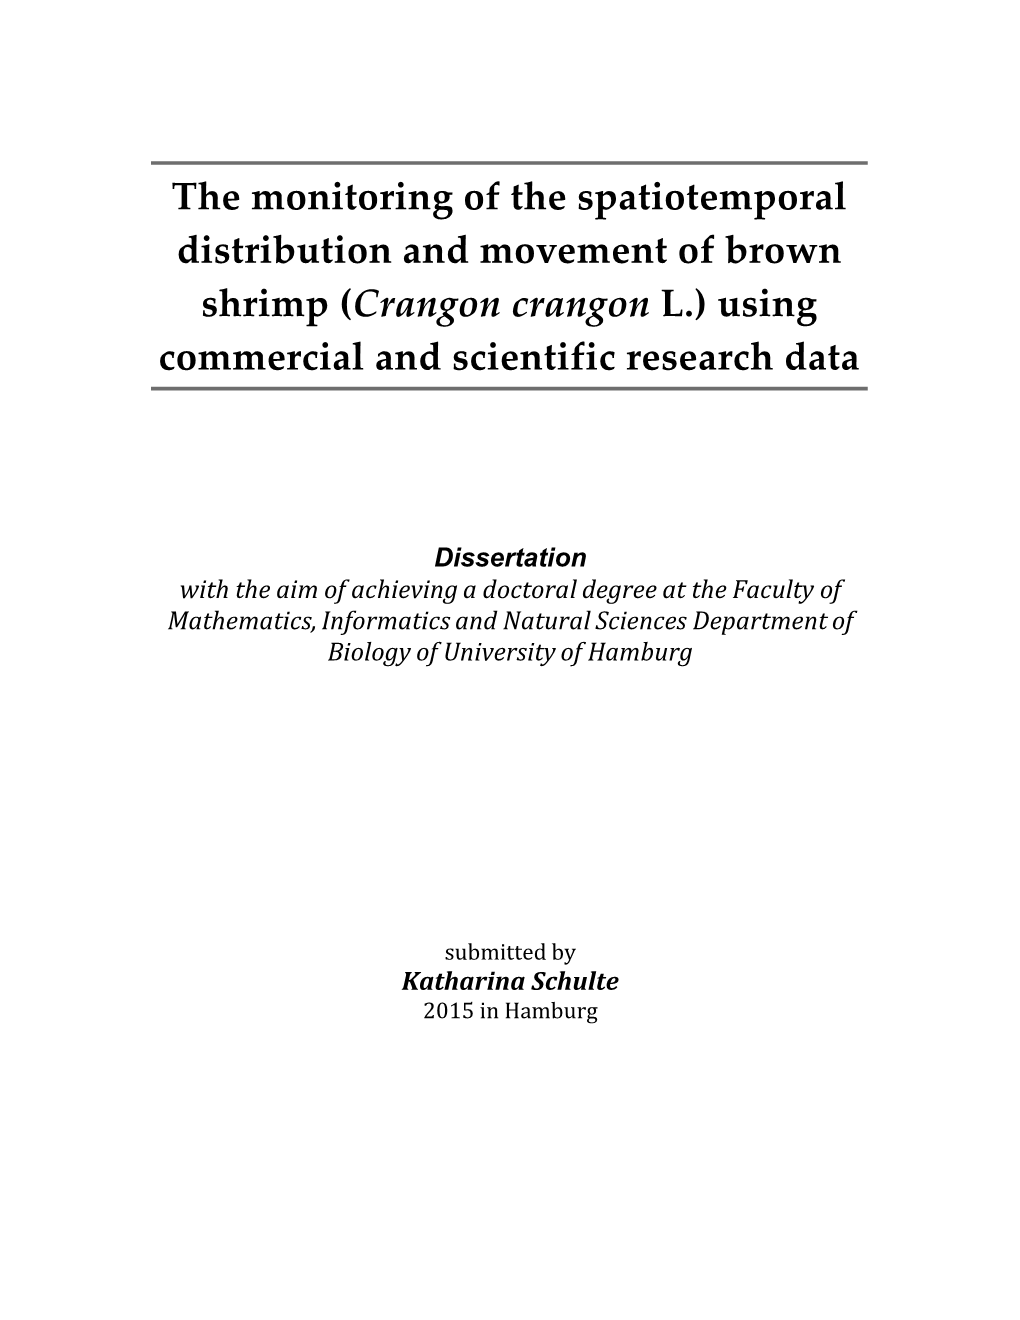 The Monitoring of the Spatiotemporal Distribution and Movement of Brown Shrimp (Crangon Crangon L.) Using Commercial and Scientific Research Data